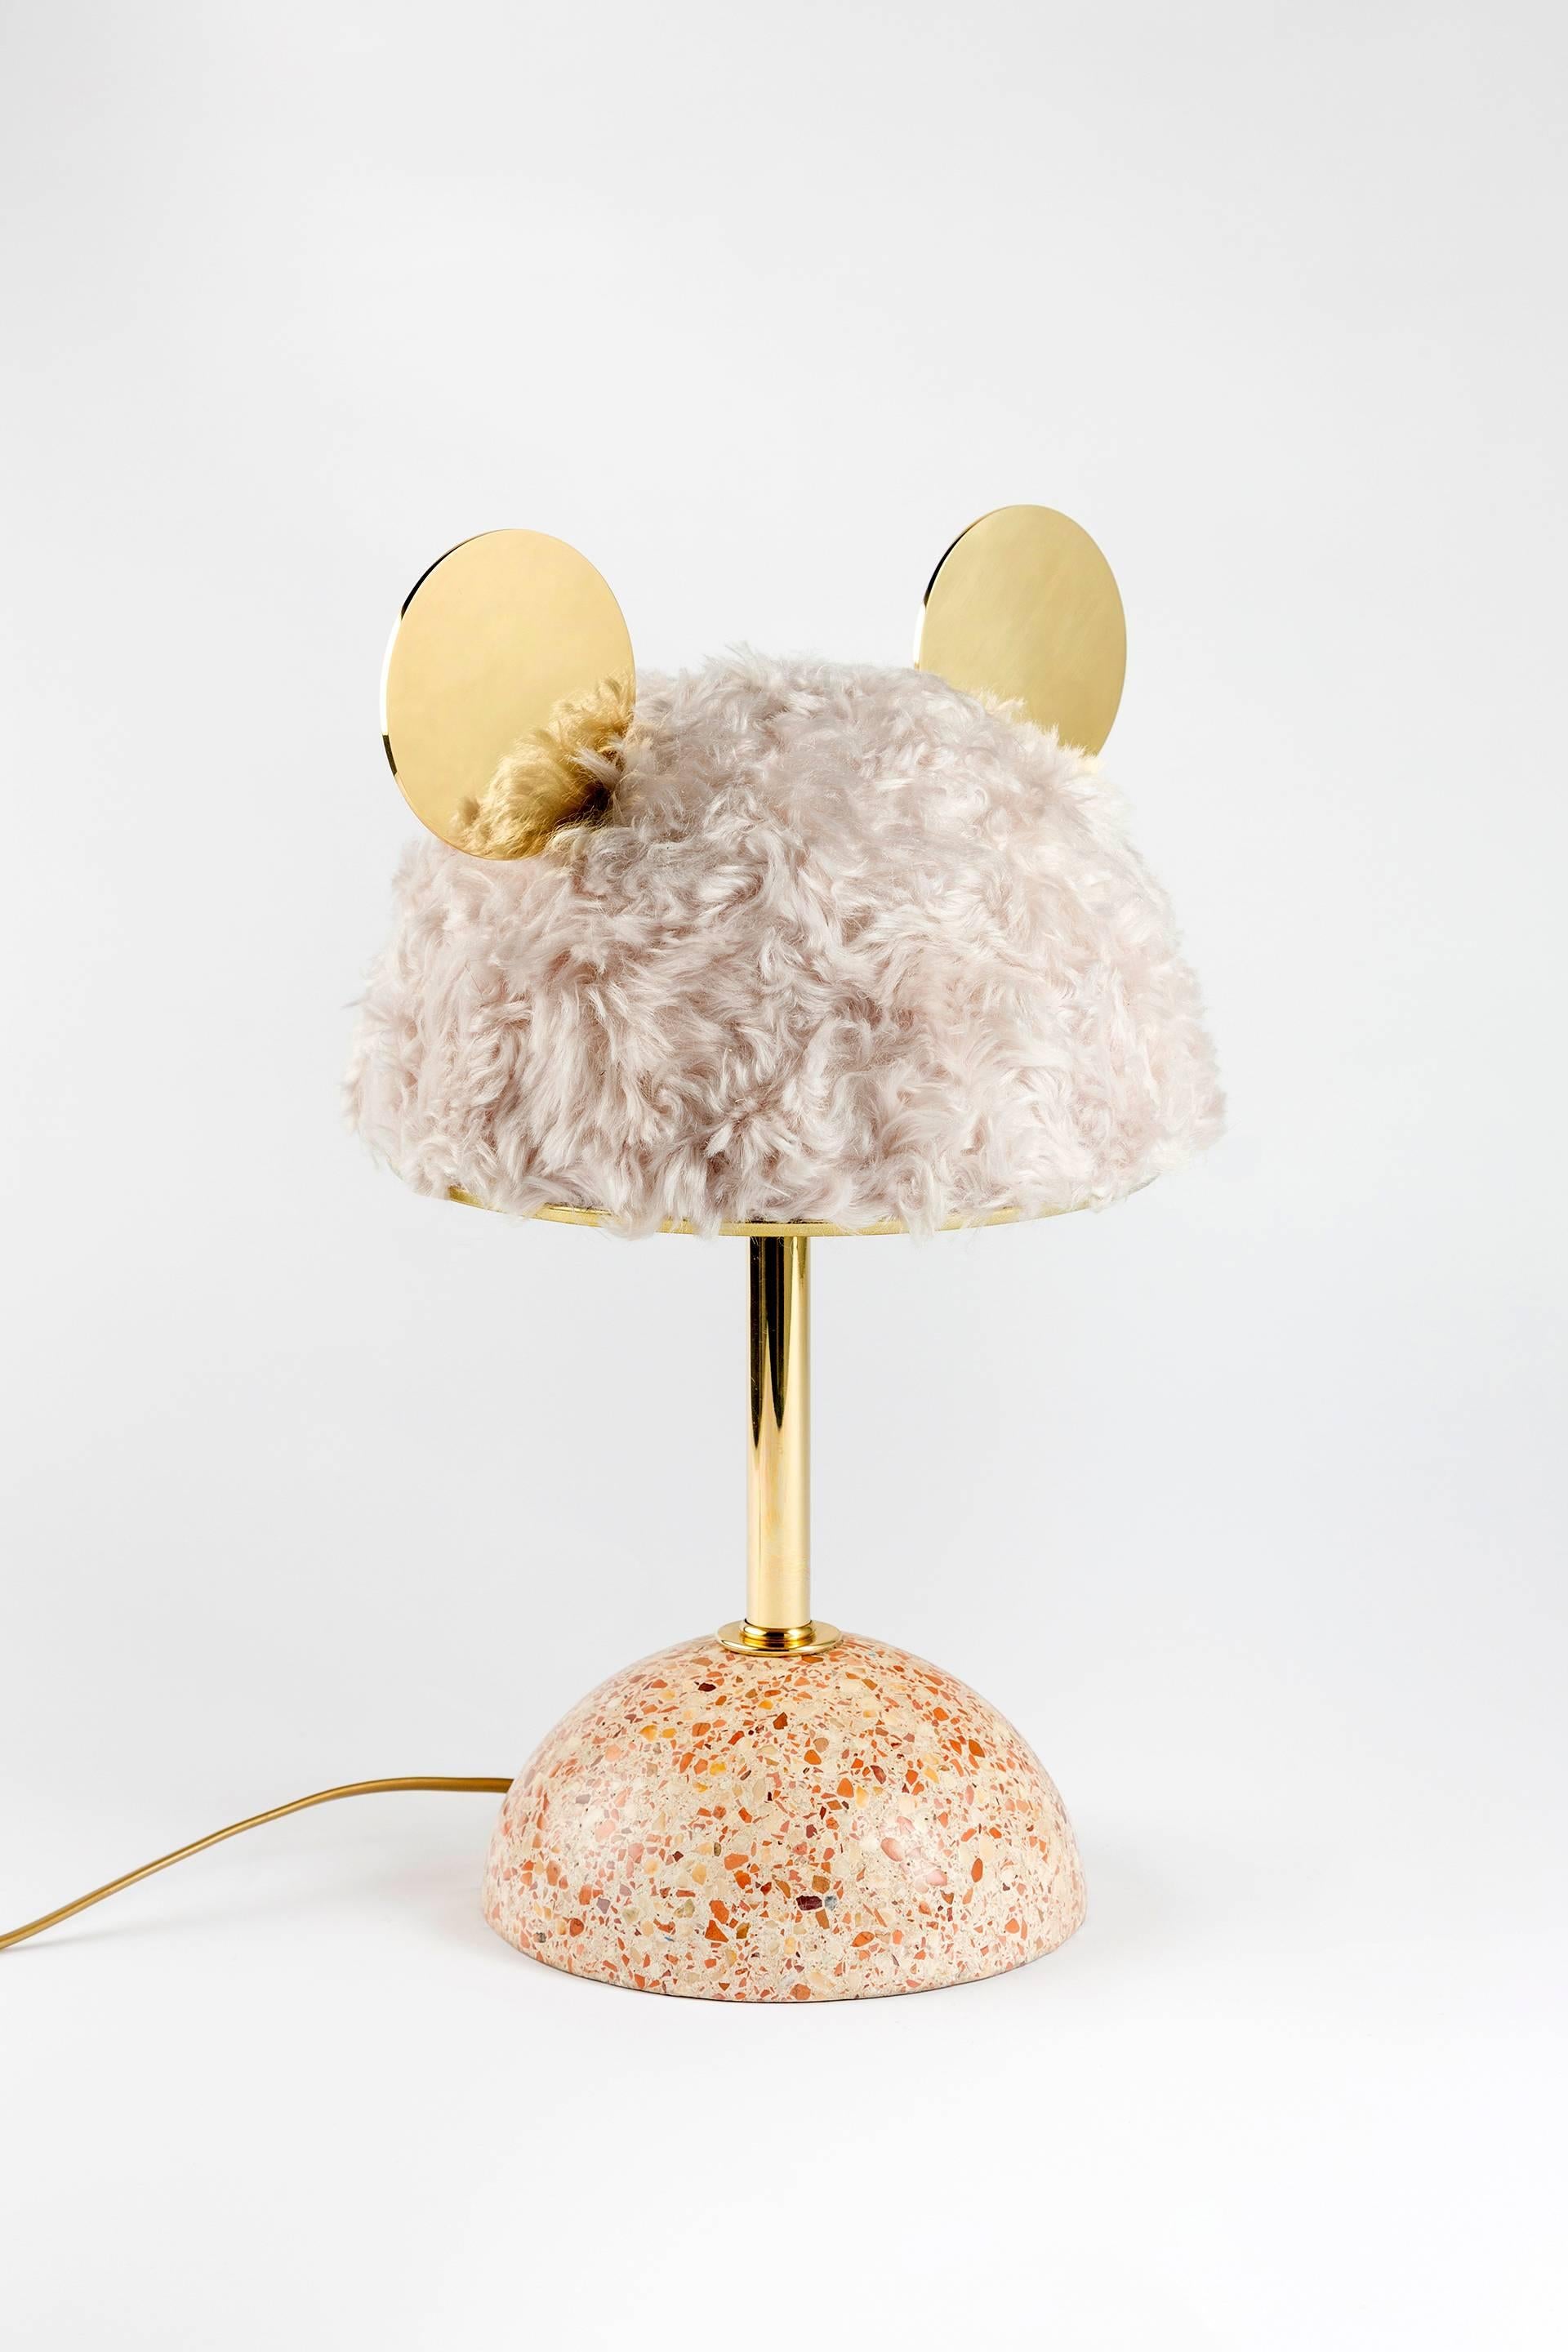 21st Century Minos Table Lamp in White Mohair, Terrazzo and Polished Brass (Sonstiges) im Angebot